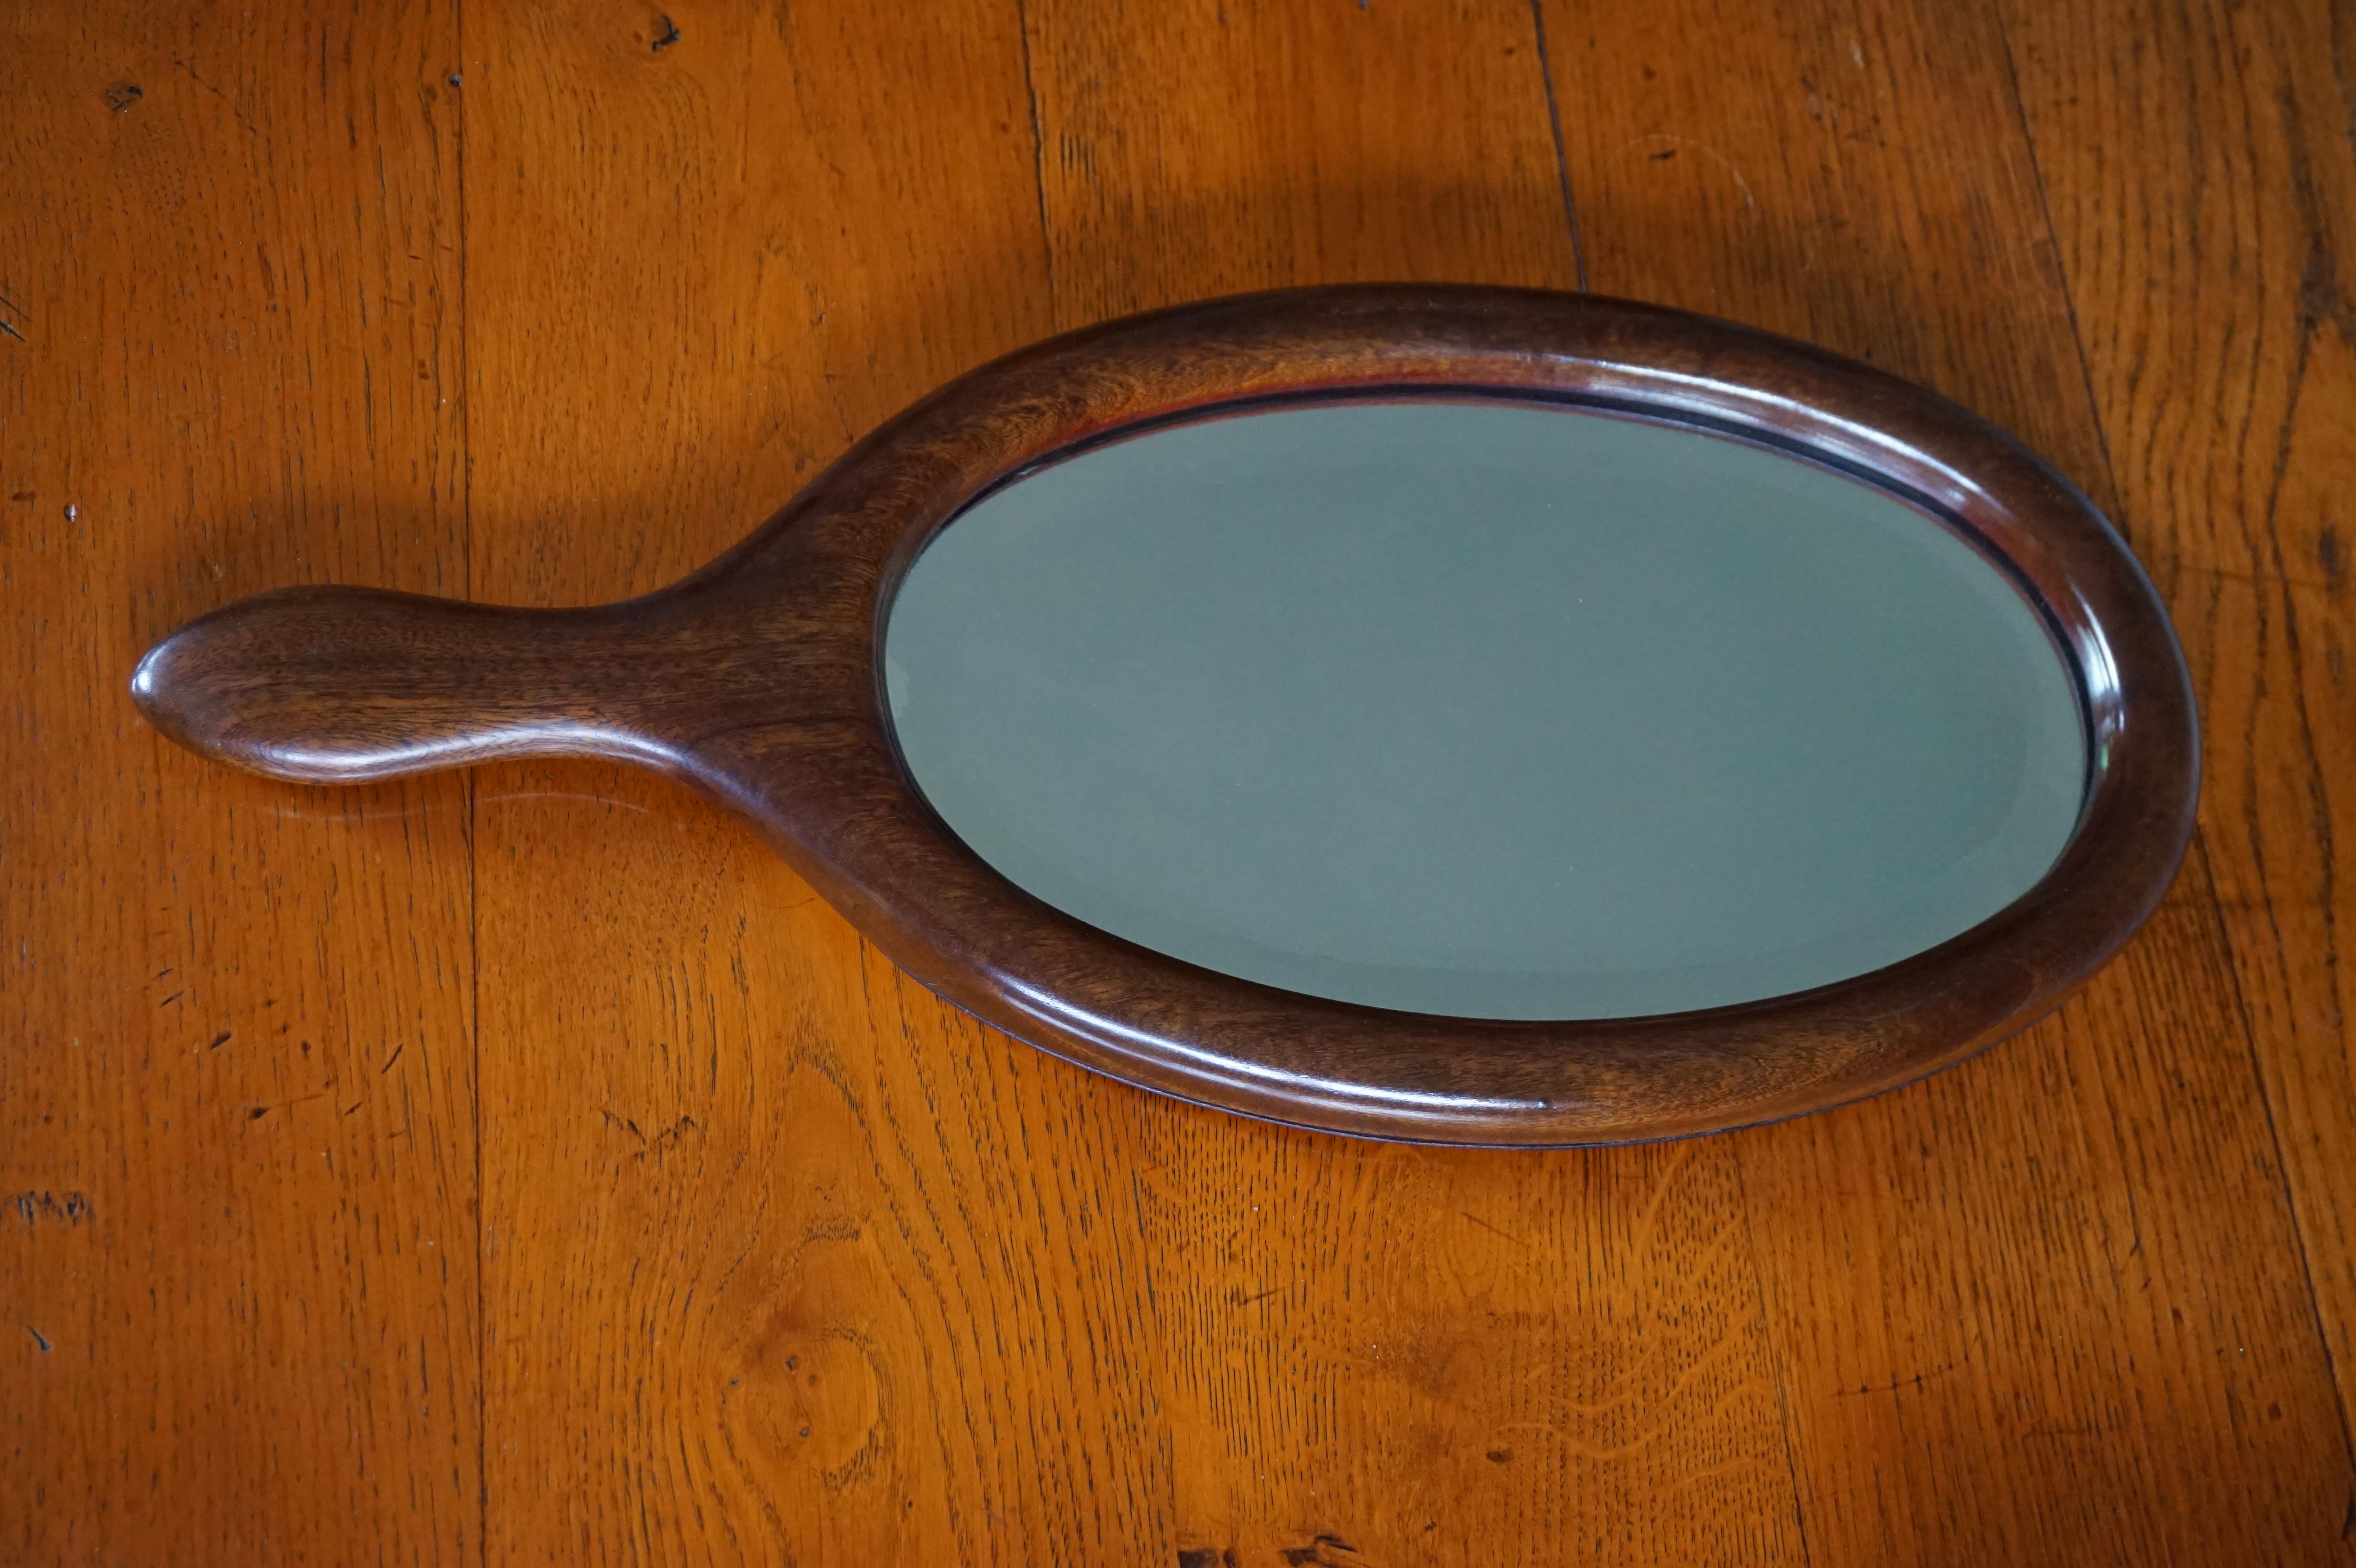 Rare size and great shape antique hand mirror.

This good size and highly practical antique hand mirror can also be used as a wall mirror. The maker of this top quality and all handcrafted antique must have been asked to create a hand mirror in